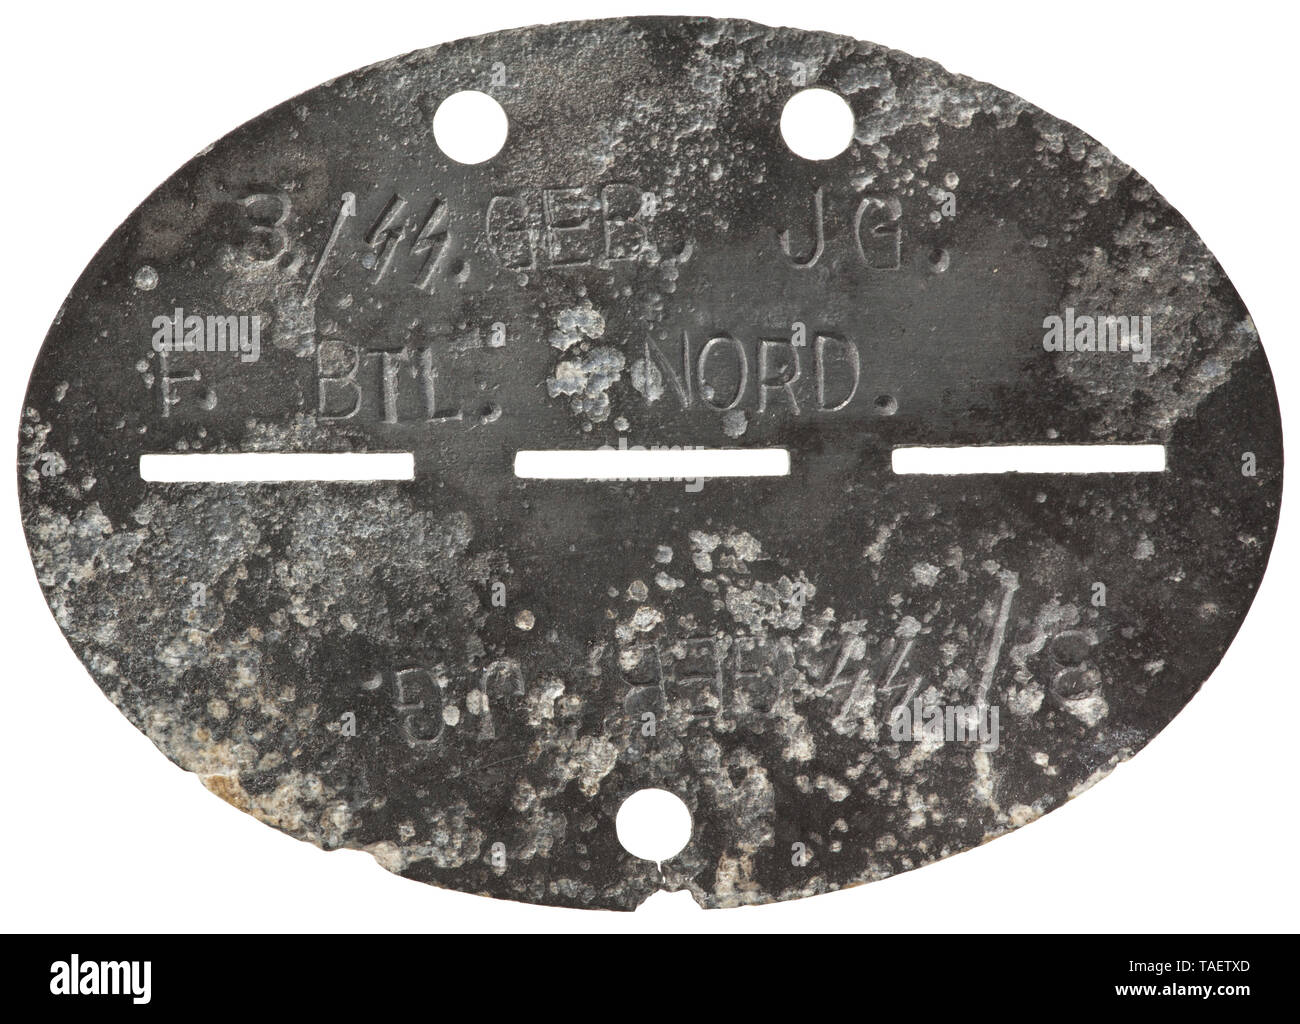 An identification tag, 6th SS Mountain Division 'Nord' Feinzink (migriert) mit vs. Bezeichnung '3./SS. Geb. Jg. F. Btl. Nord', rs. mit Markung '1288'. historic, historical, 20th century, 1930s, 1940s, Waffen-SS, armed division of the SS, armed service, armed services, NS, National Socialism, Nazism, Third Reich, German Reich, Germany, military, militaria, utensil, piece of equipment, utensils, object, objects, stills, clipping, clippings, cut out, cut-out, cut-outs, fascism, fascistic, National Socialist, Nazi, Nazi period, Editorial-Use-Only Stock Photo